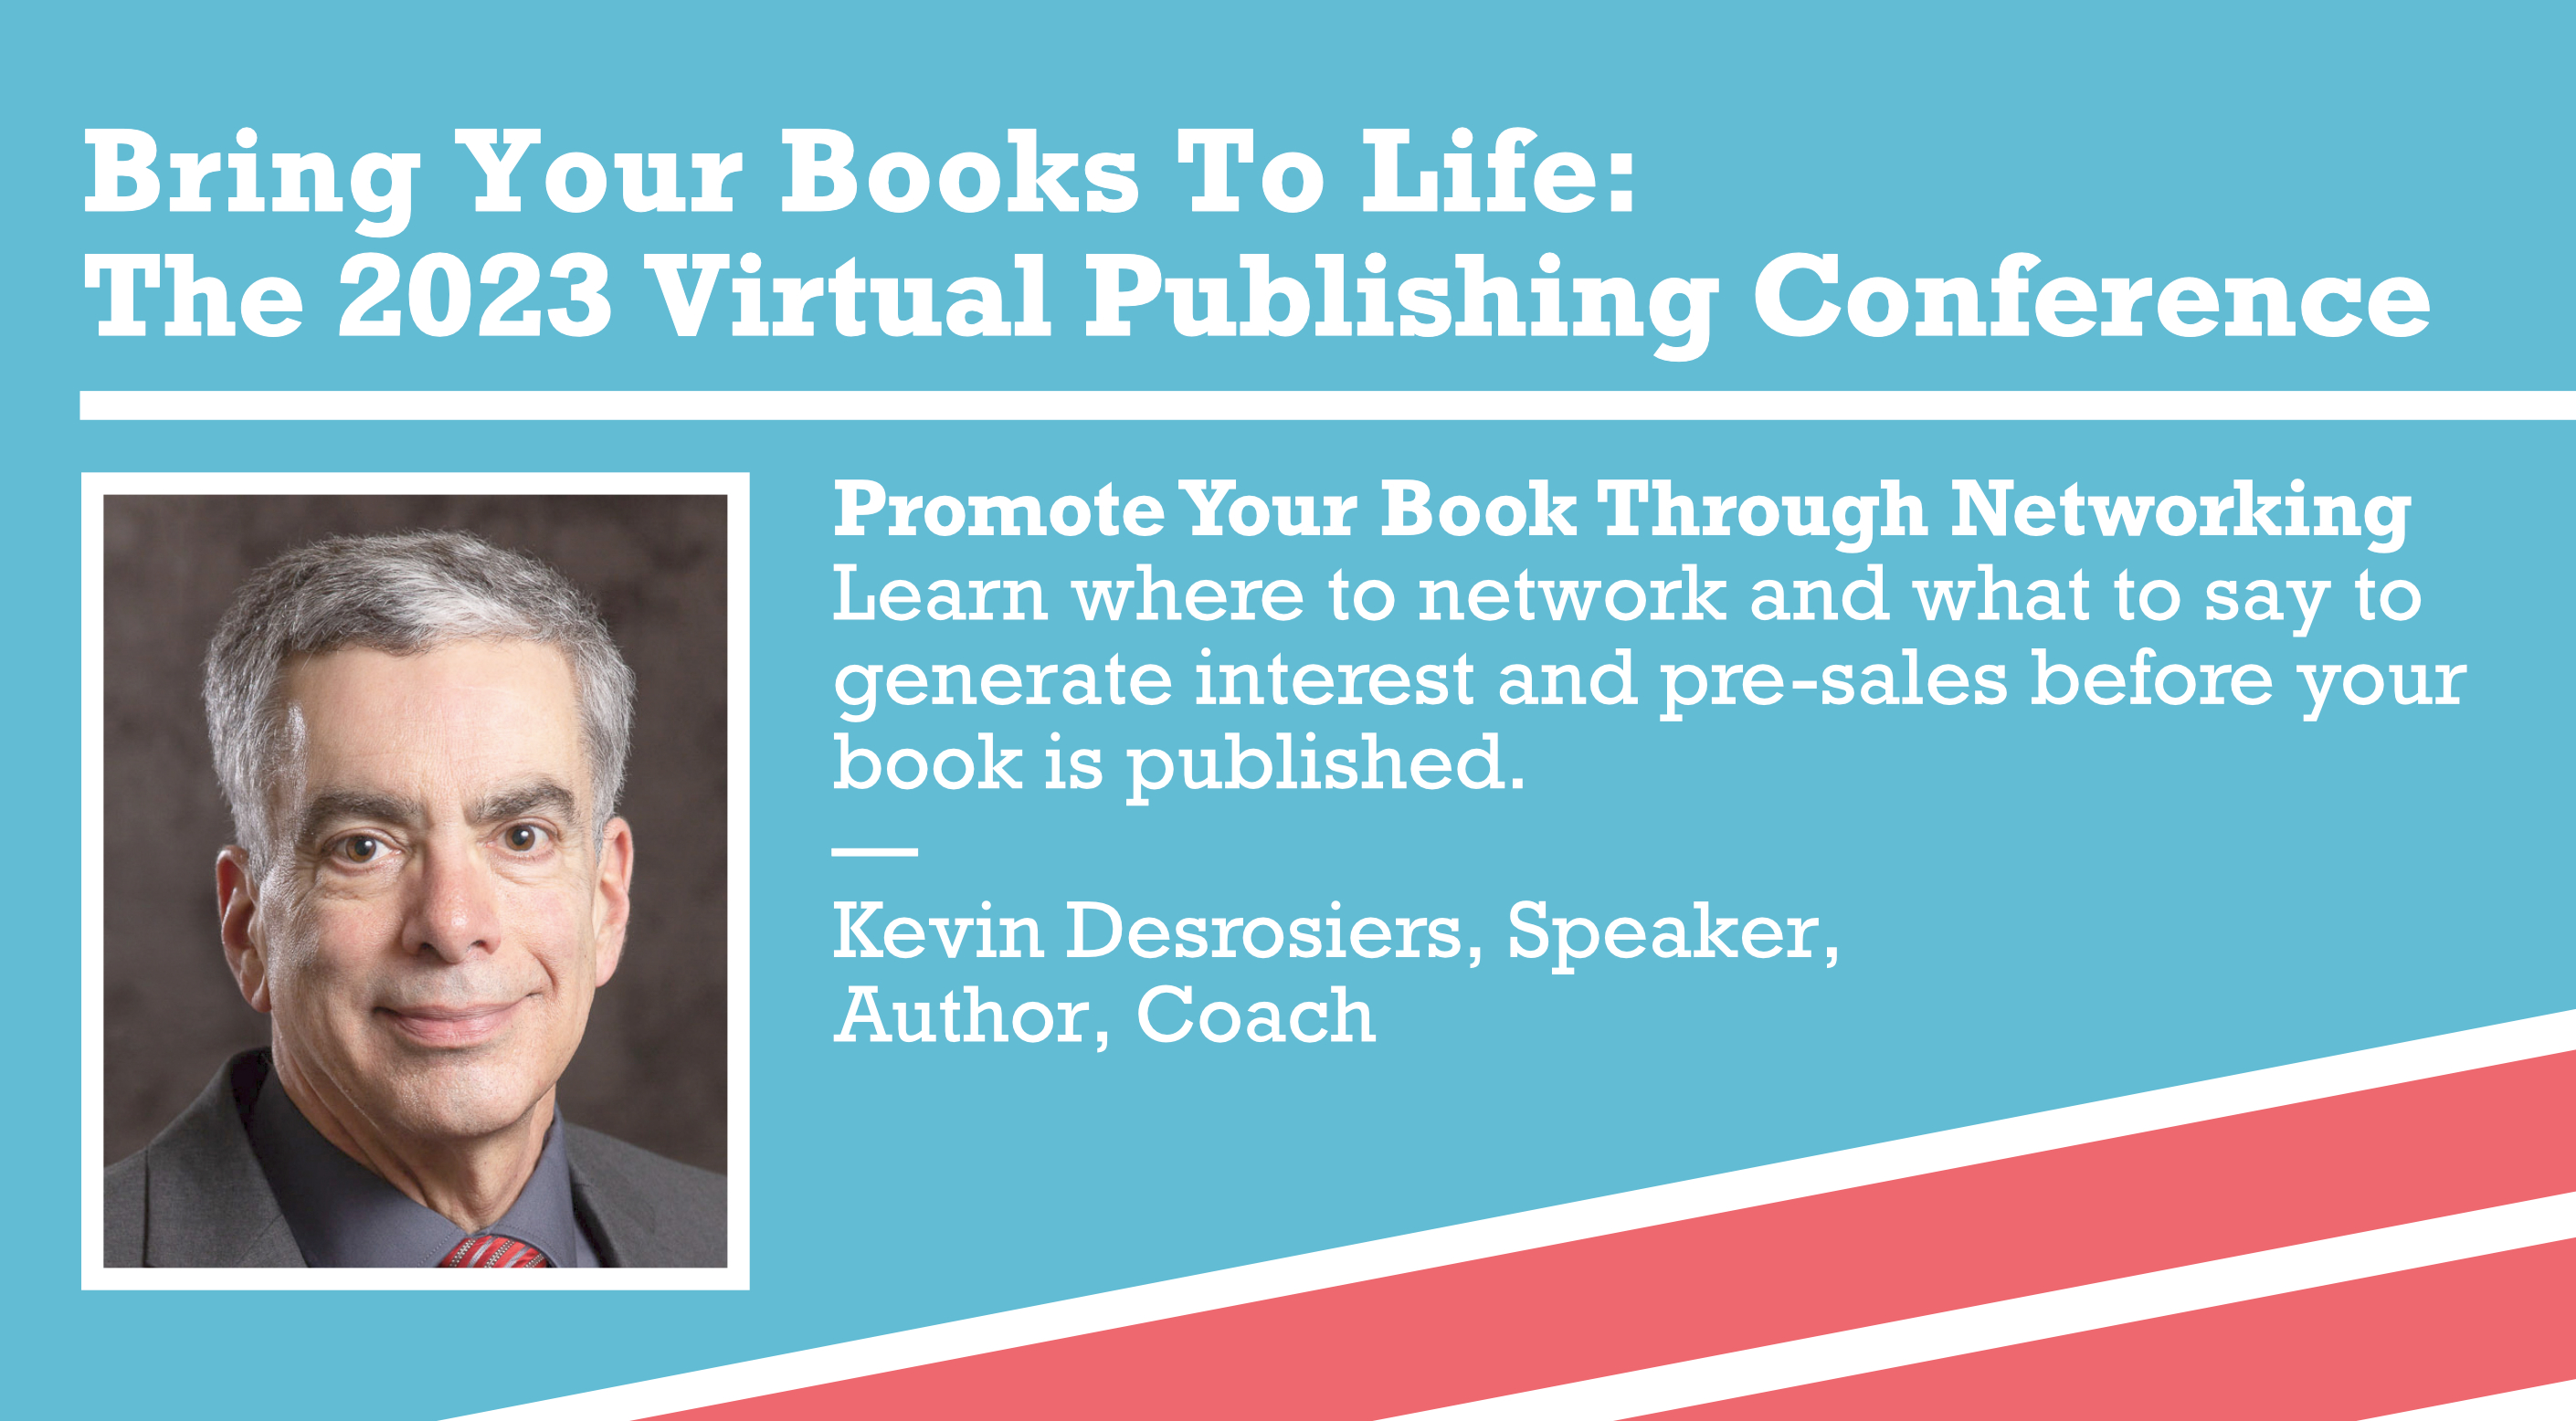  Promote Your Book Through Networking — Learn where to network and what to say to generate interest and pre-sales before your book is published. — Kevin Desrosiers, Speaker, Author, Coach